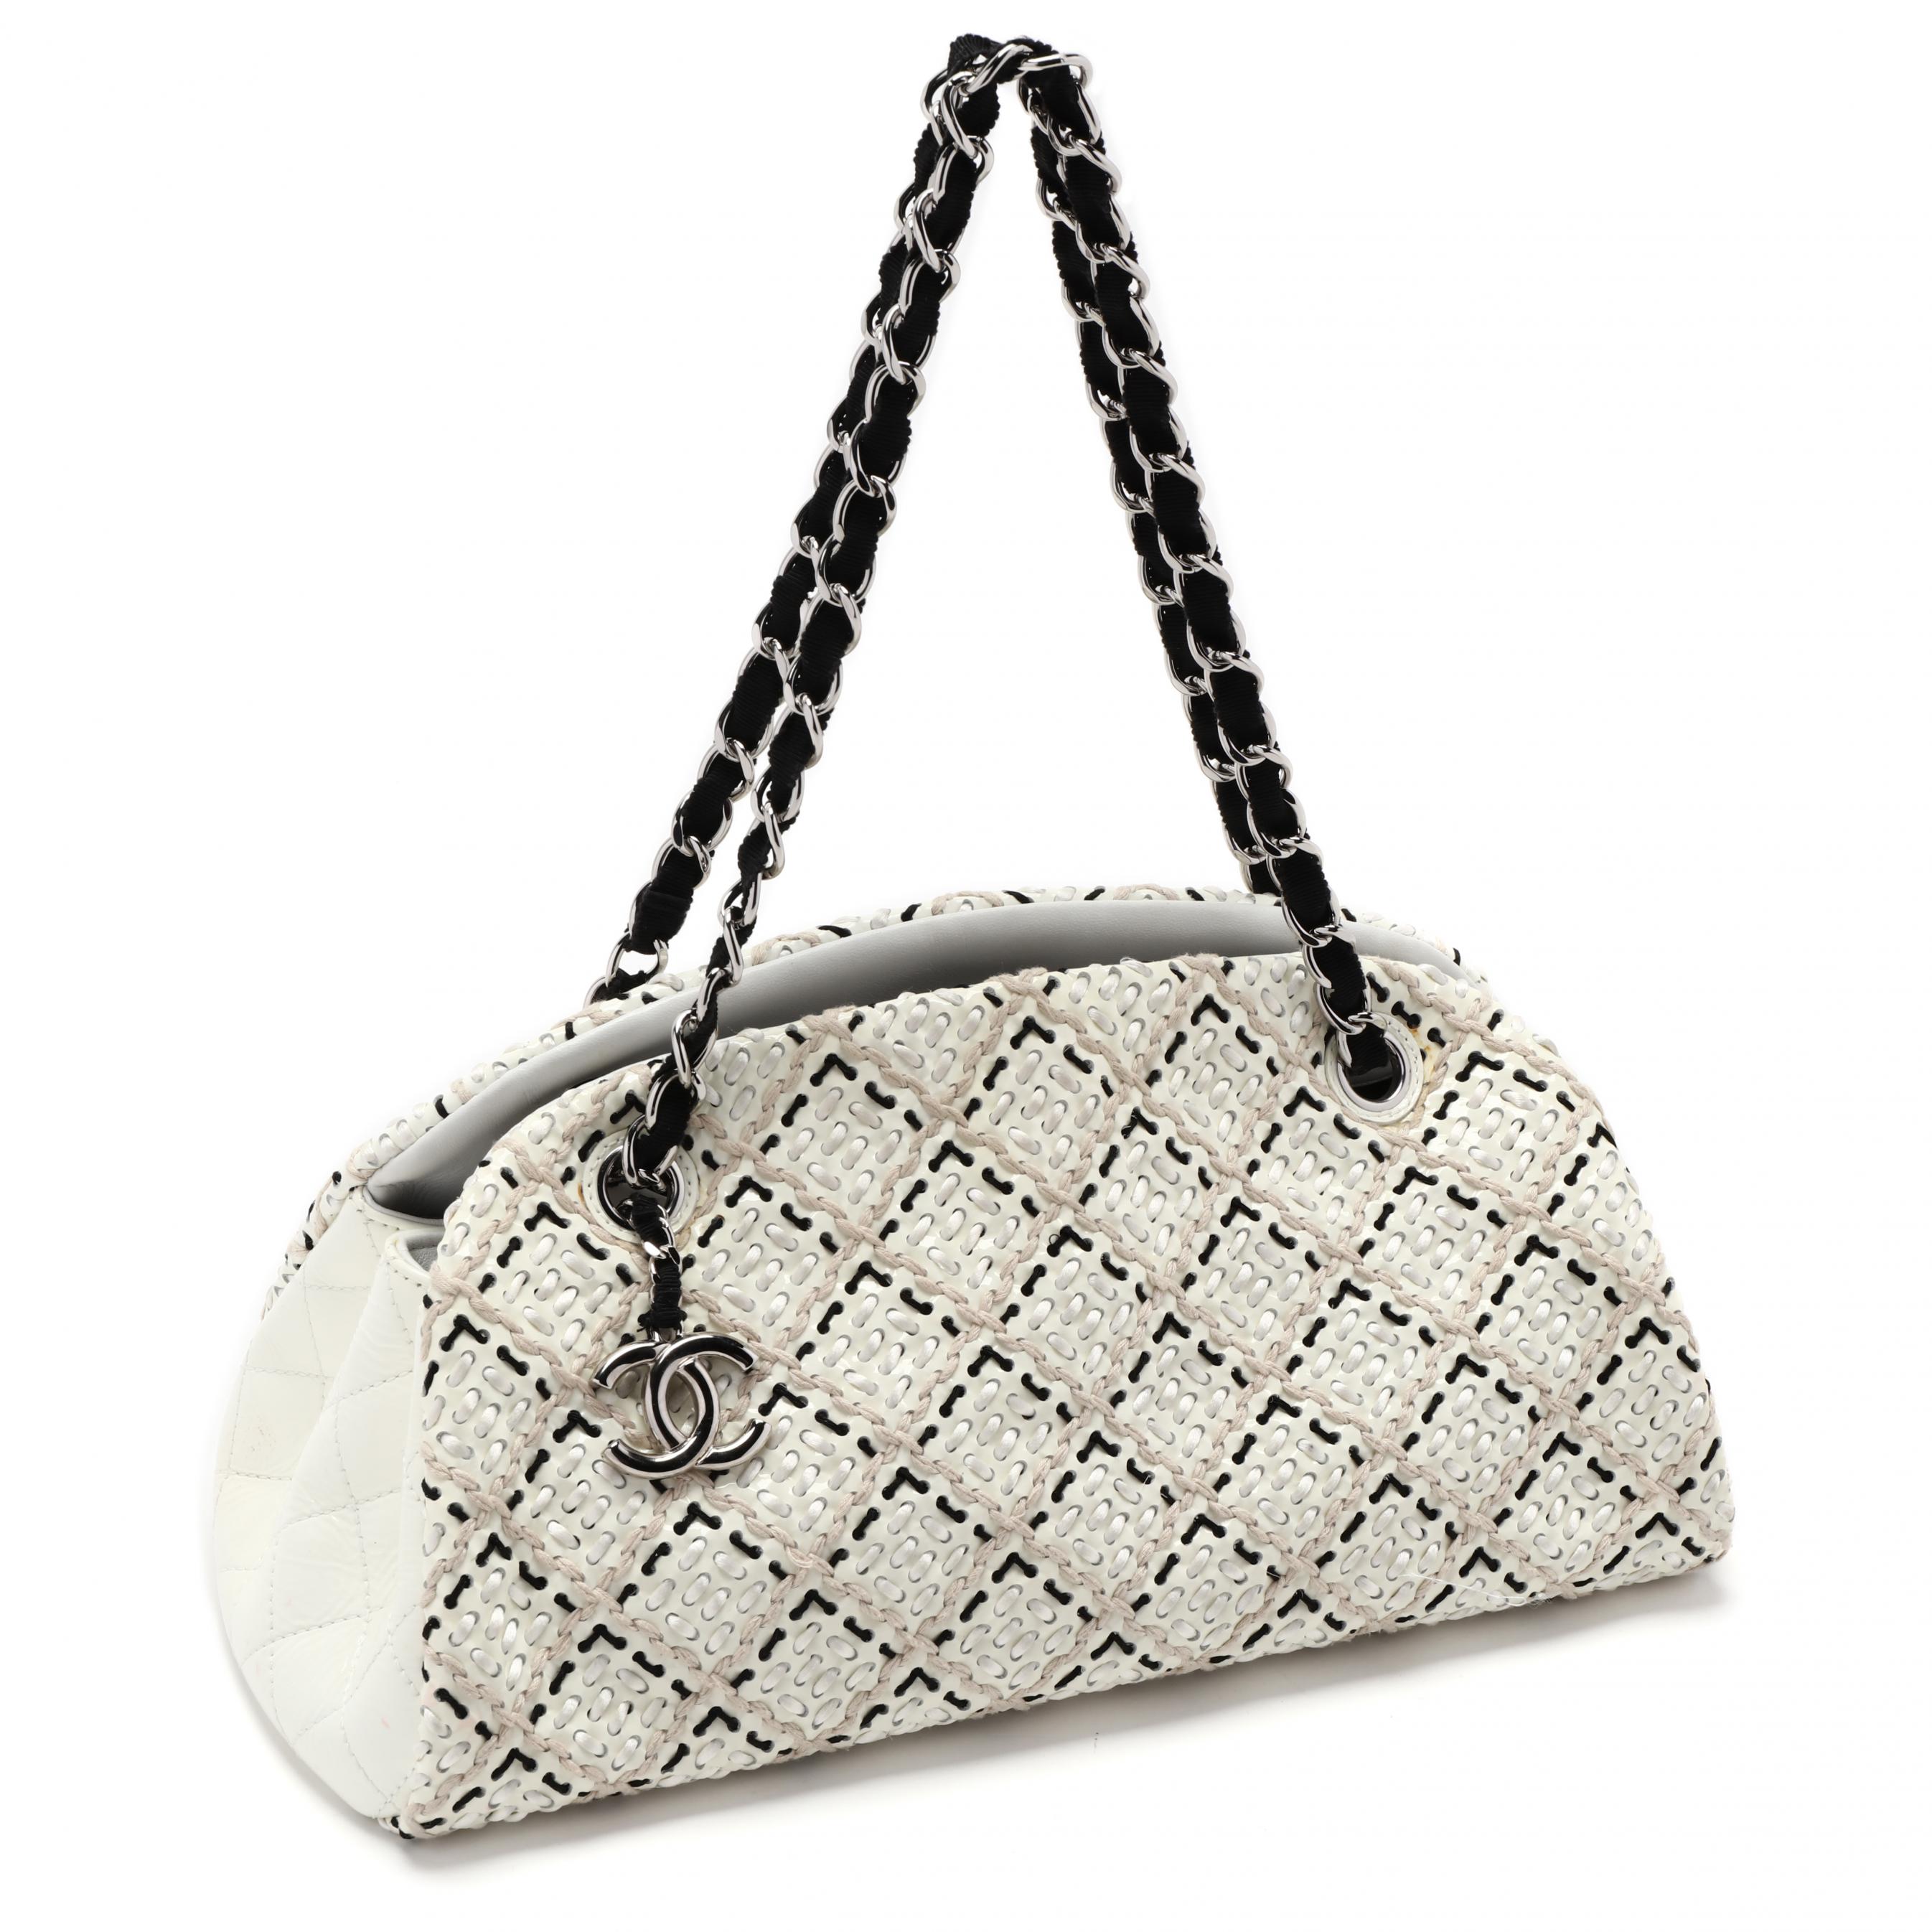 Bag Review: Chanel Mademoiselle Bowling Bag